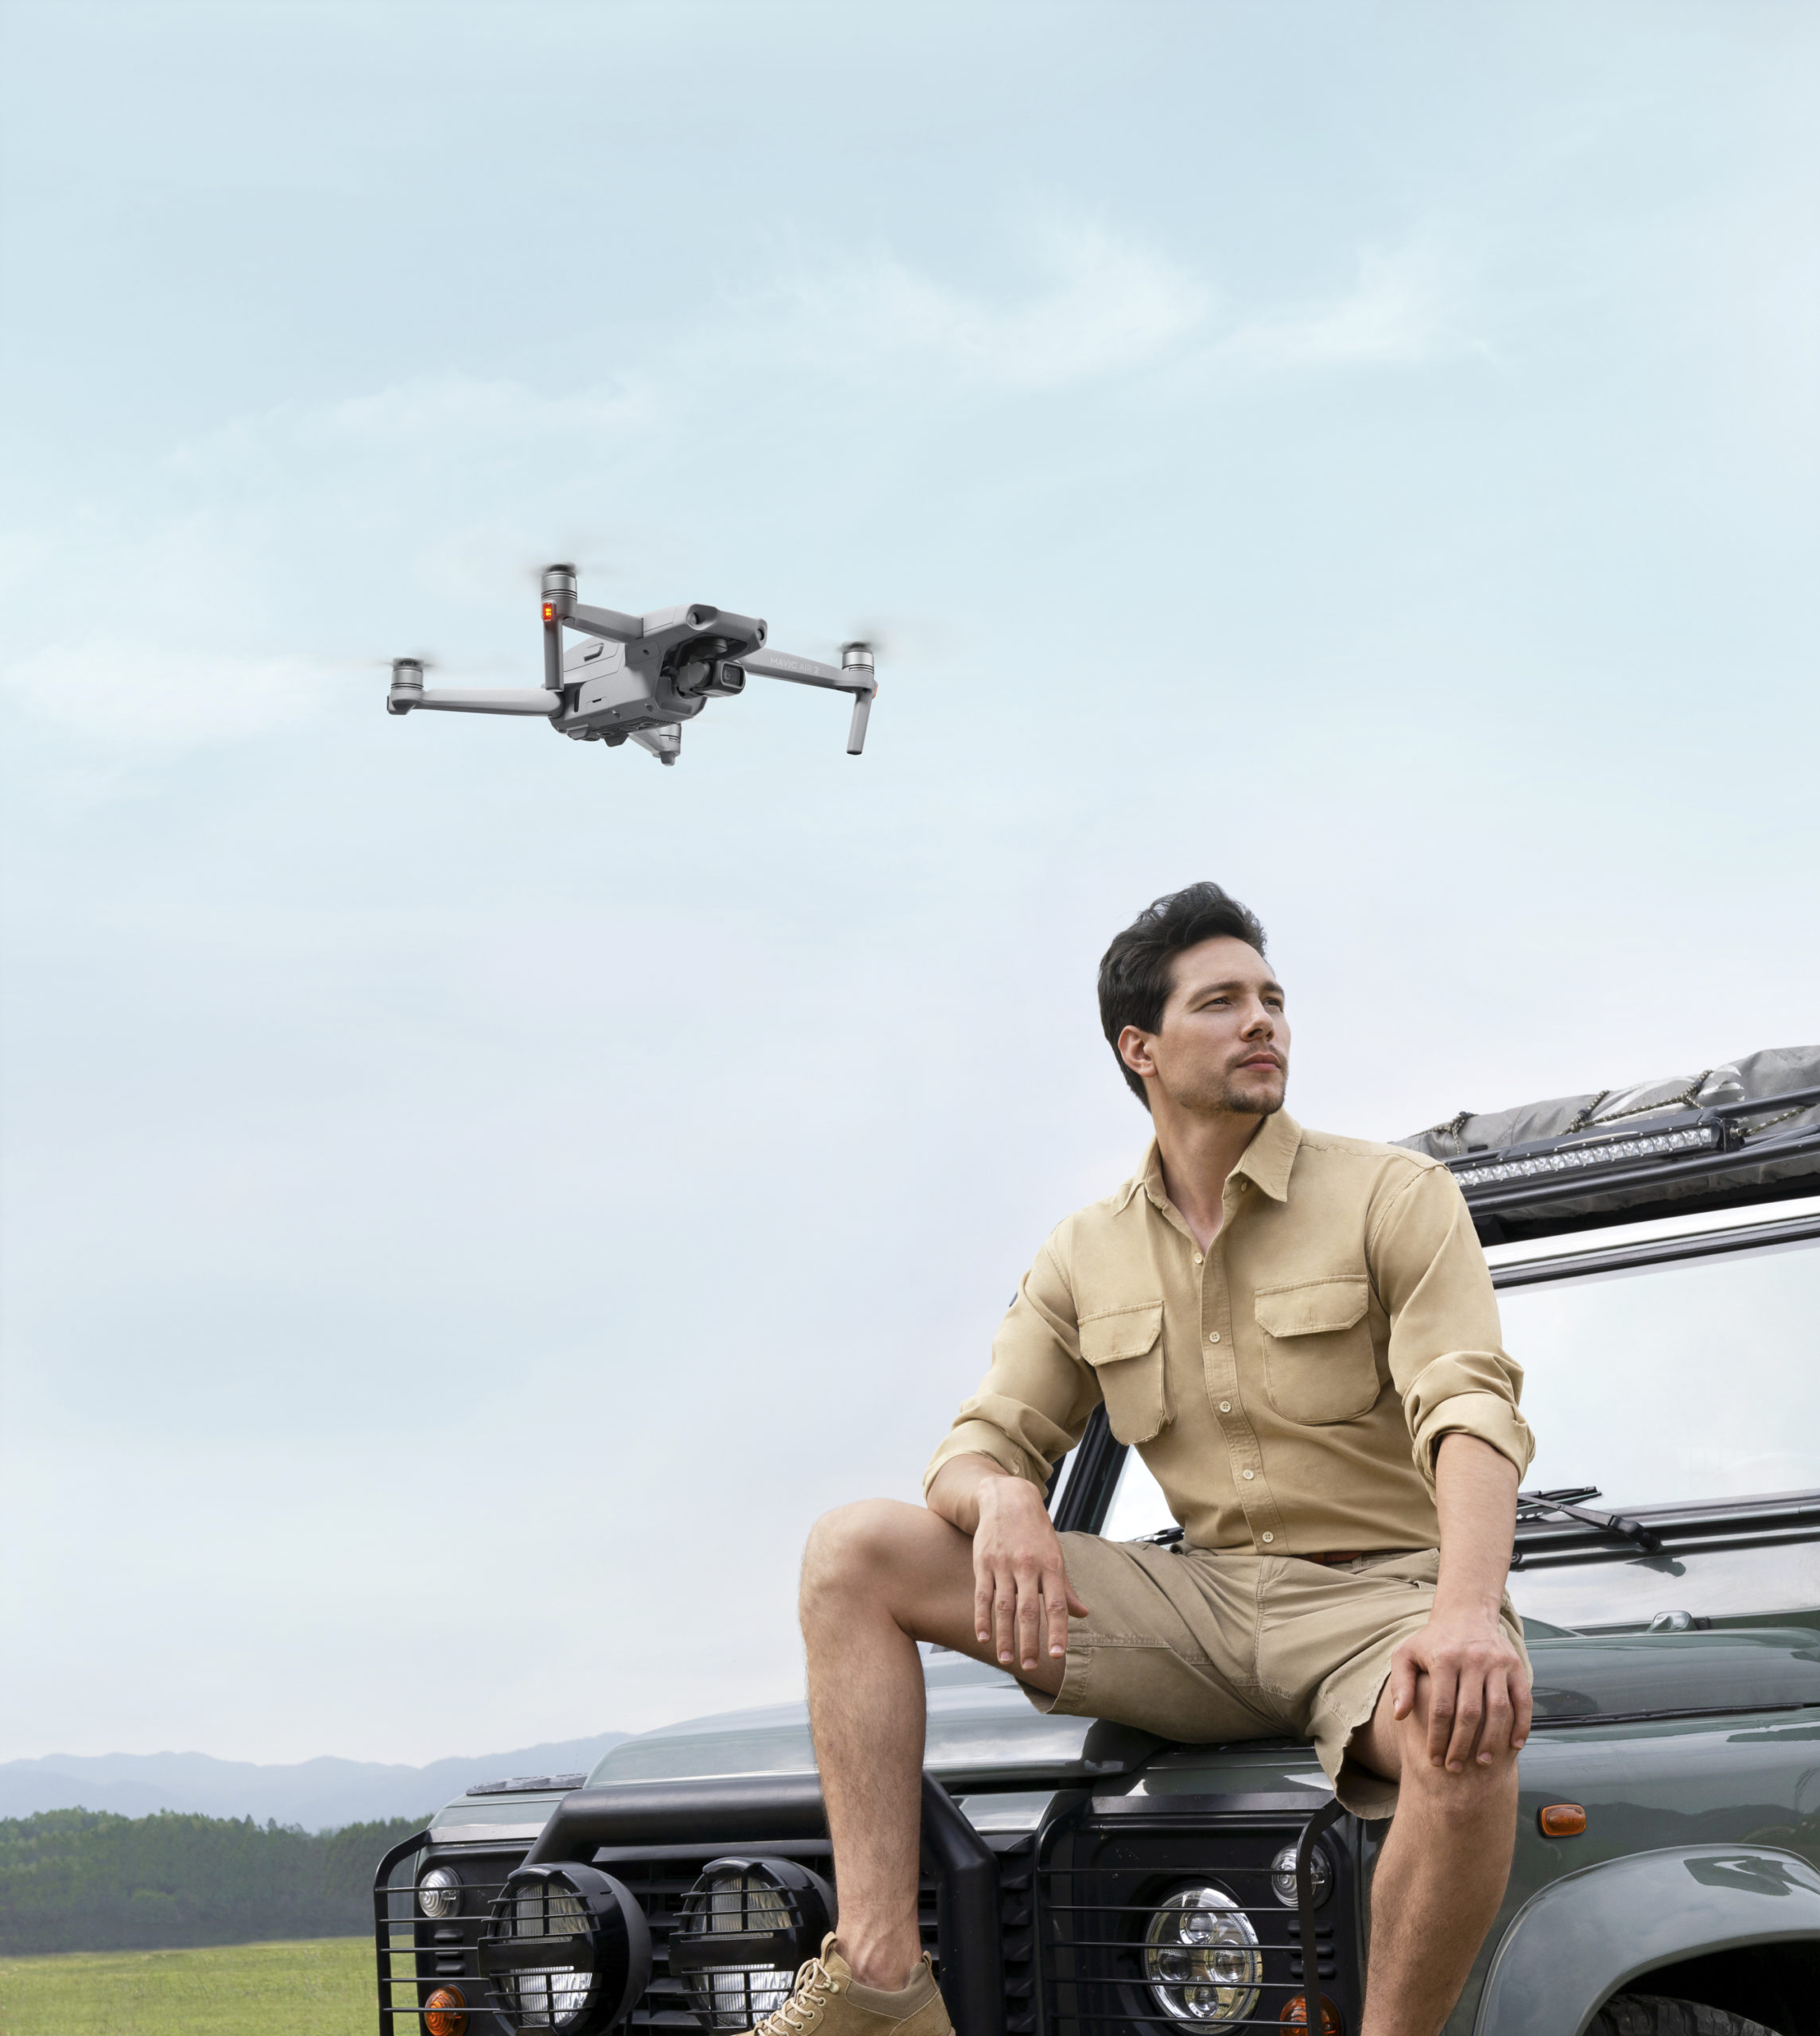 The Camera in the New DJI Mavic Air 2 Shoots RAW, and More to Know